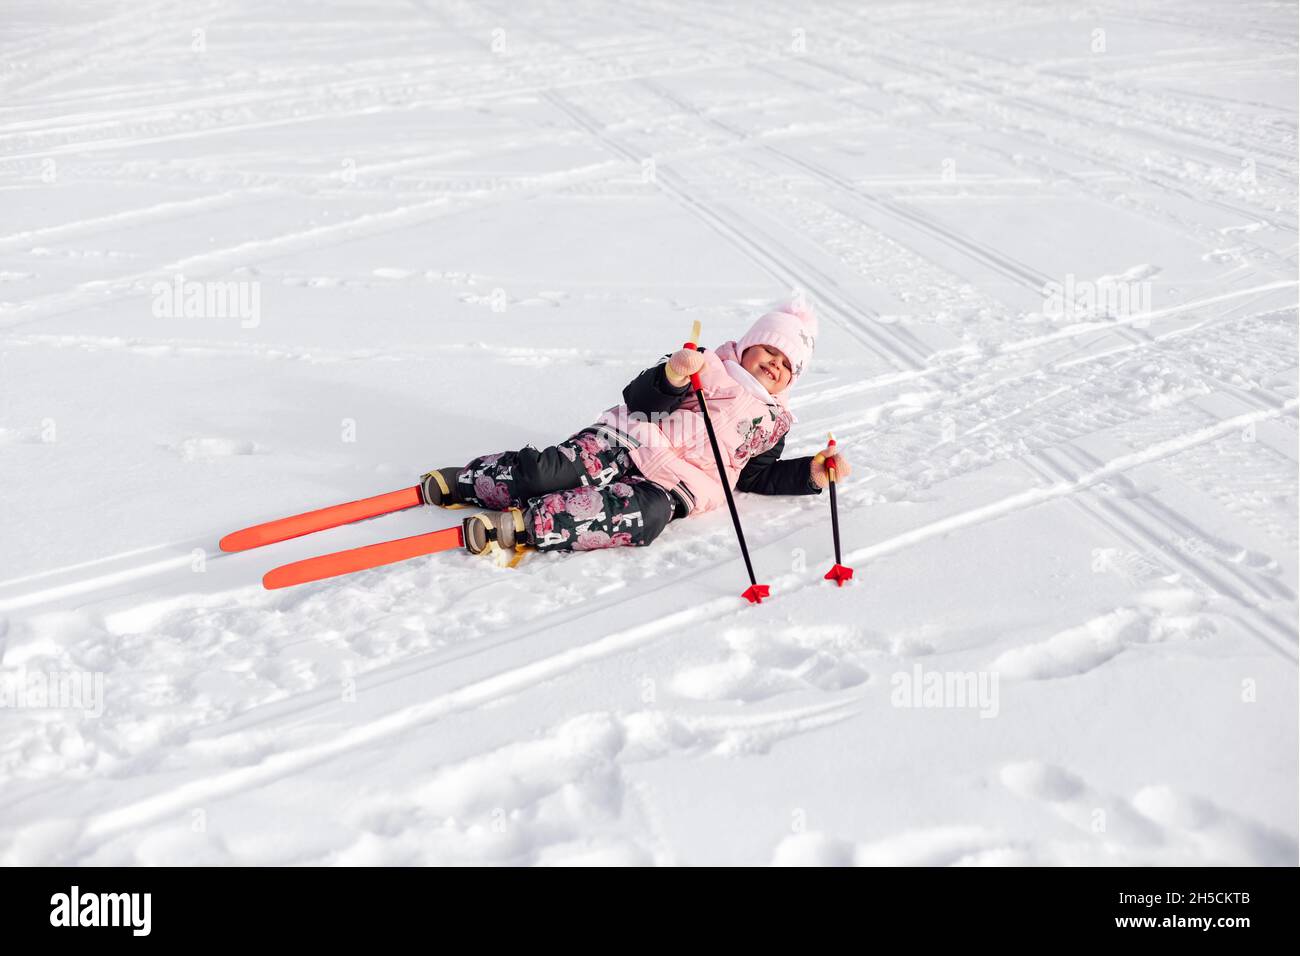 Child is lying on snow. Happy little girl in pink suit is learning to ski and fell on snowy road, snowy background Stock Photo